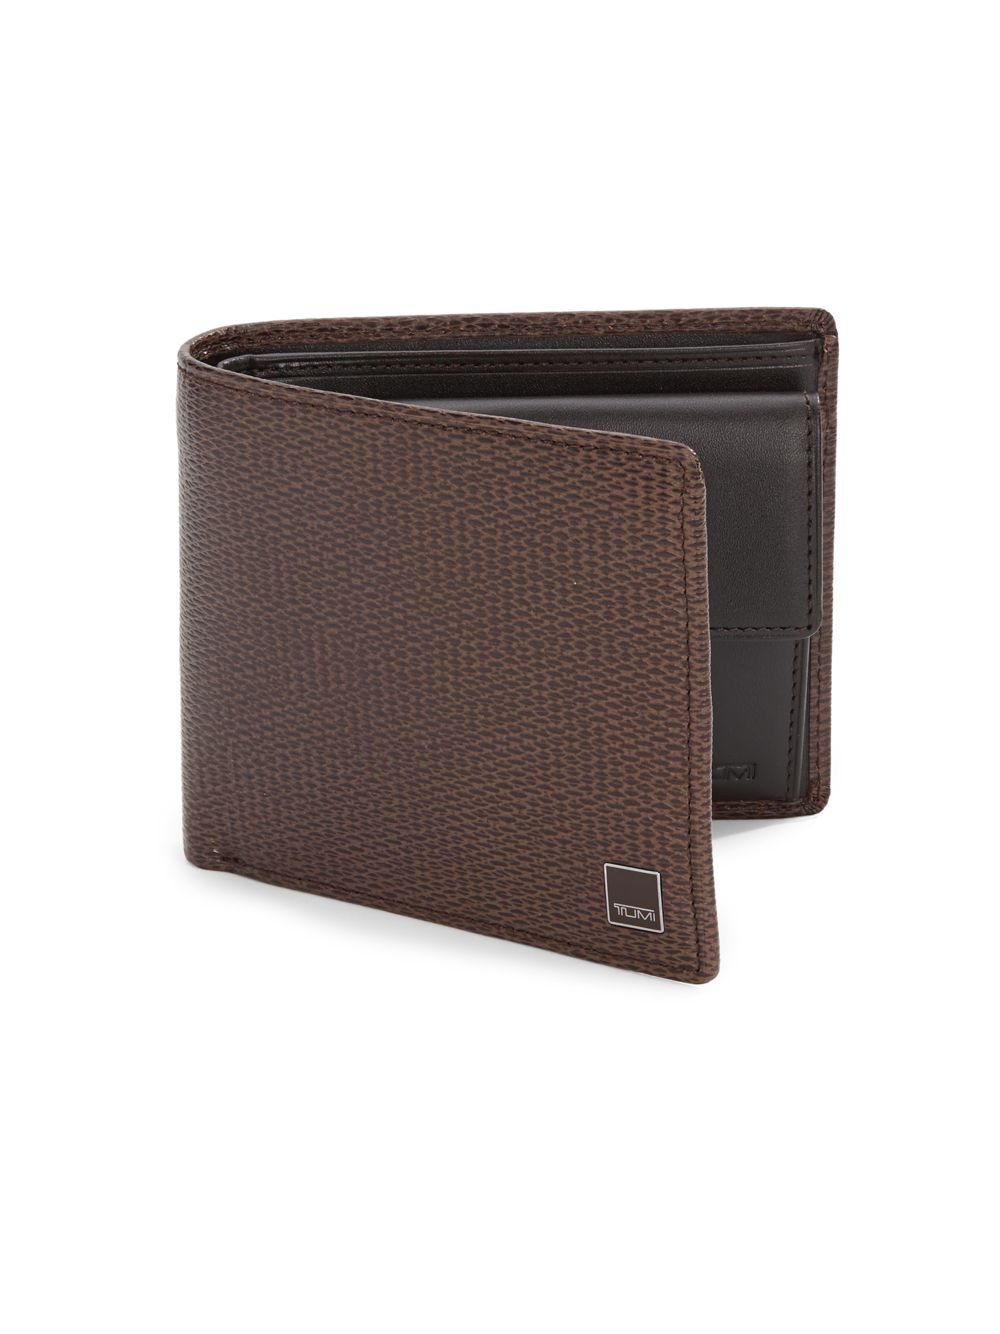 Lyst - Tumi Textured Leather Global Billfold Wallet in Brown for Men